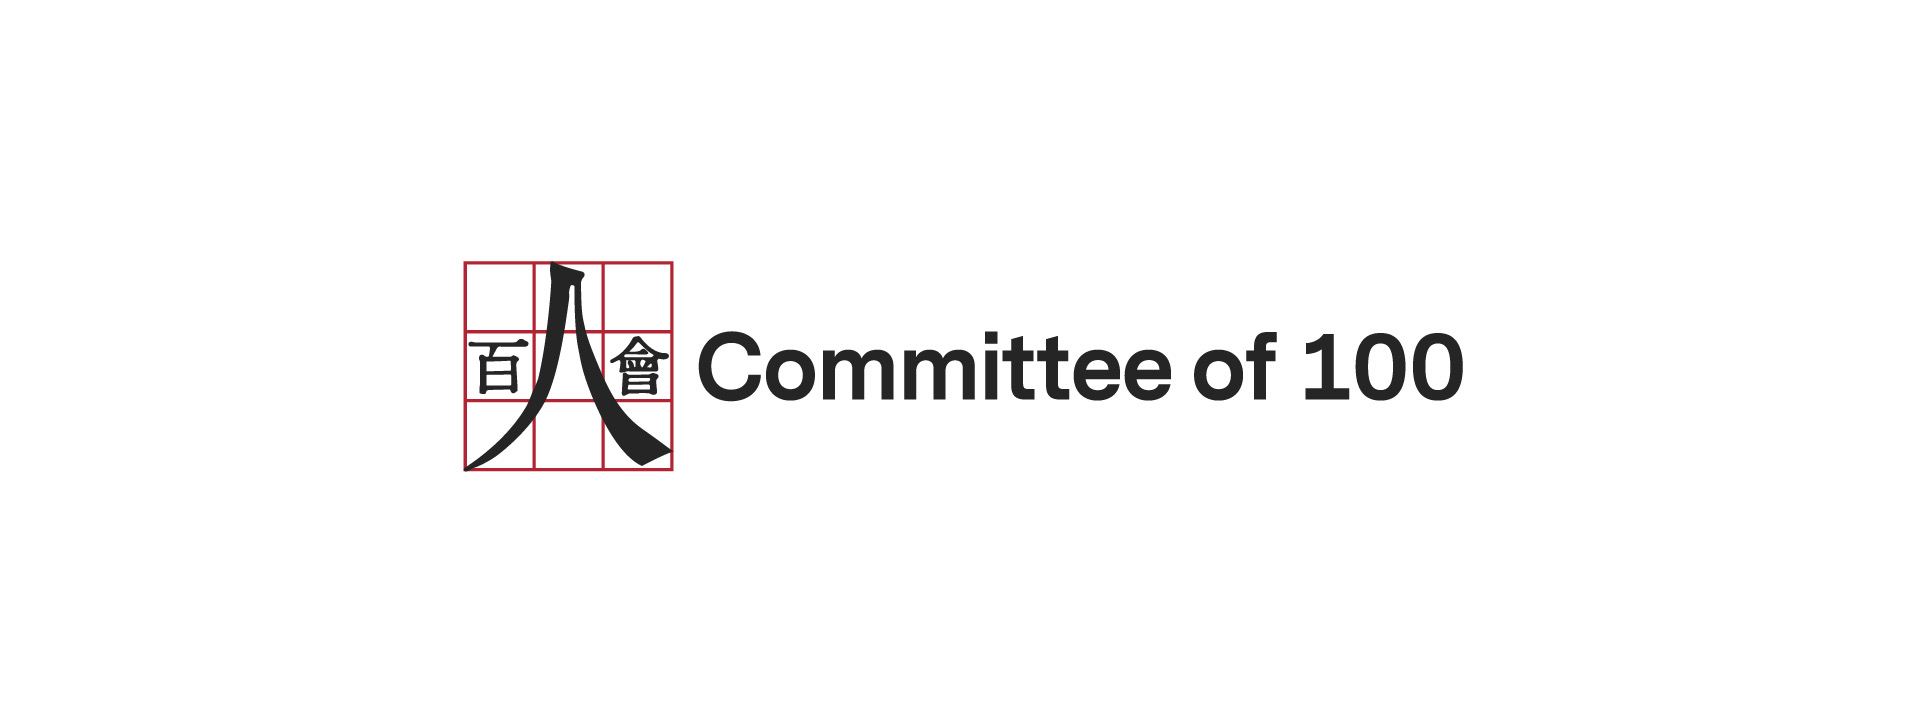 Statement by Committee of 100 on the Violence and Terrorism in Israel, Palestine, and the Gaza Strip